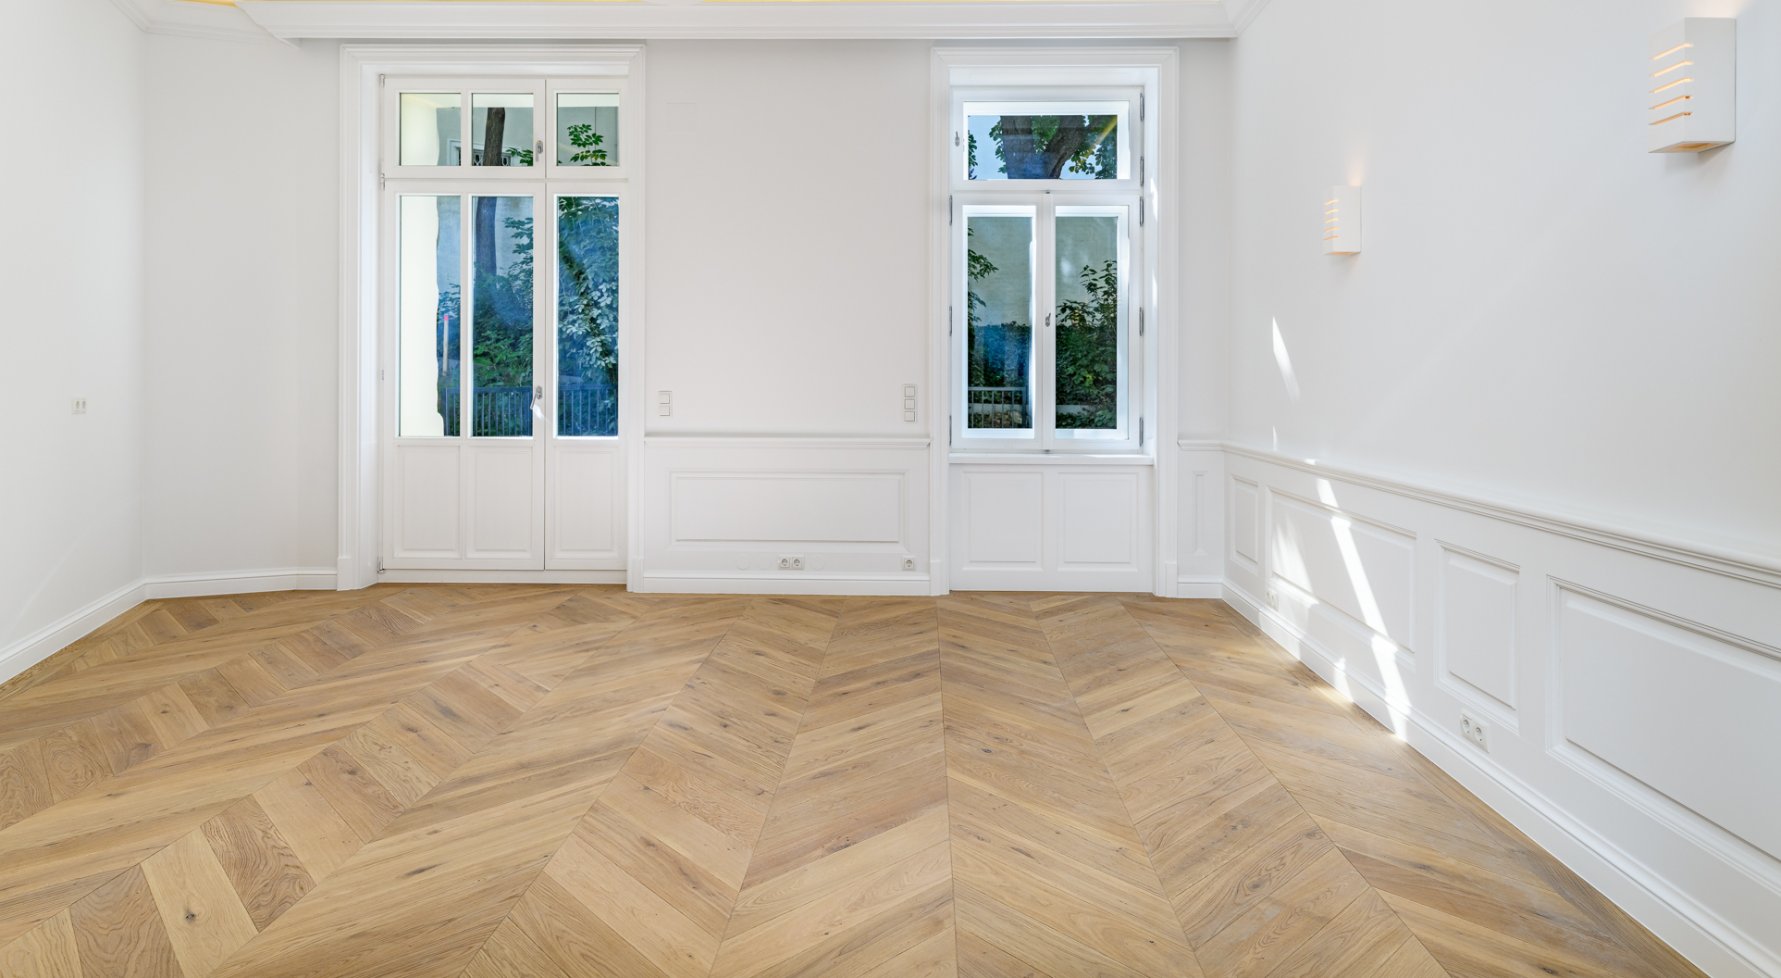 Property in 1090 Wien, 9. Bezirk: Grand Park Residence: exquisite 3-room period building as first occupancy - picture 1